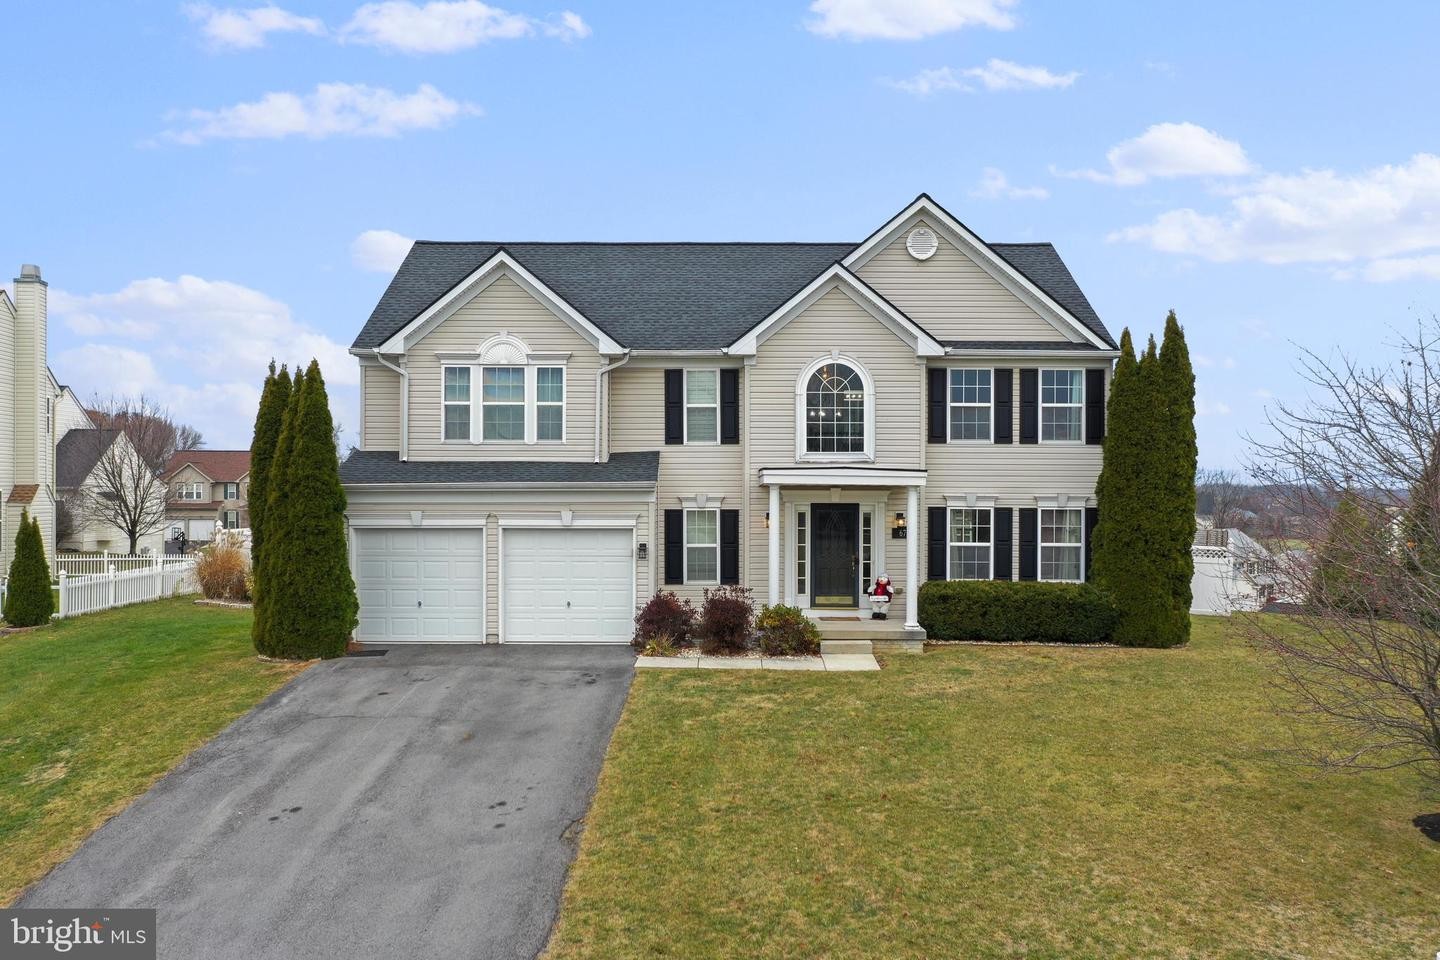 1. 67 Bridle Hill Ct